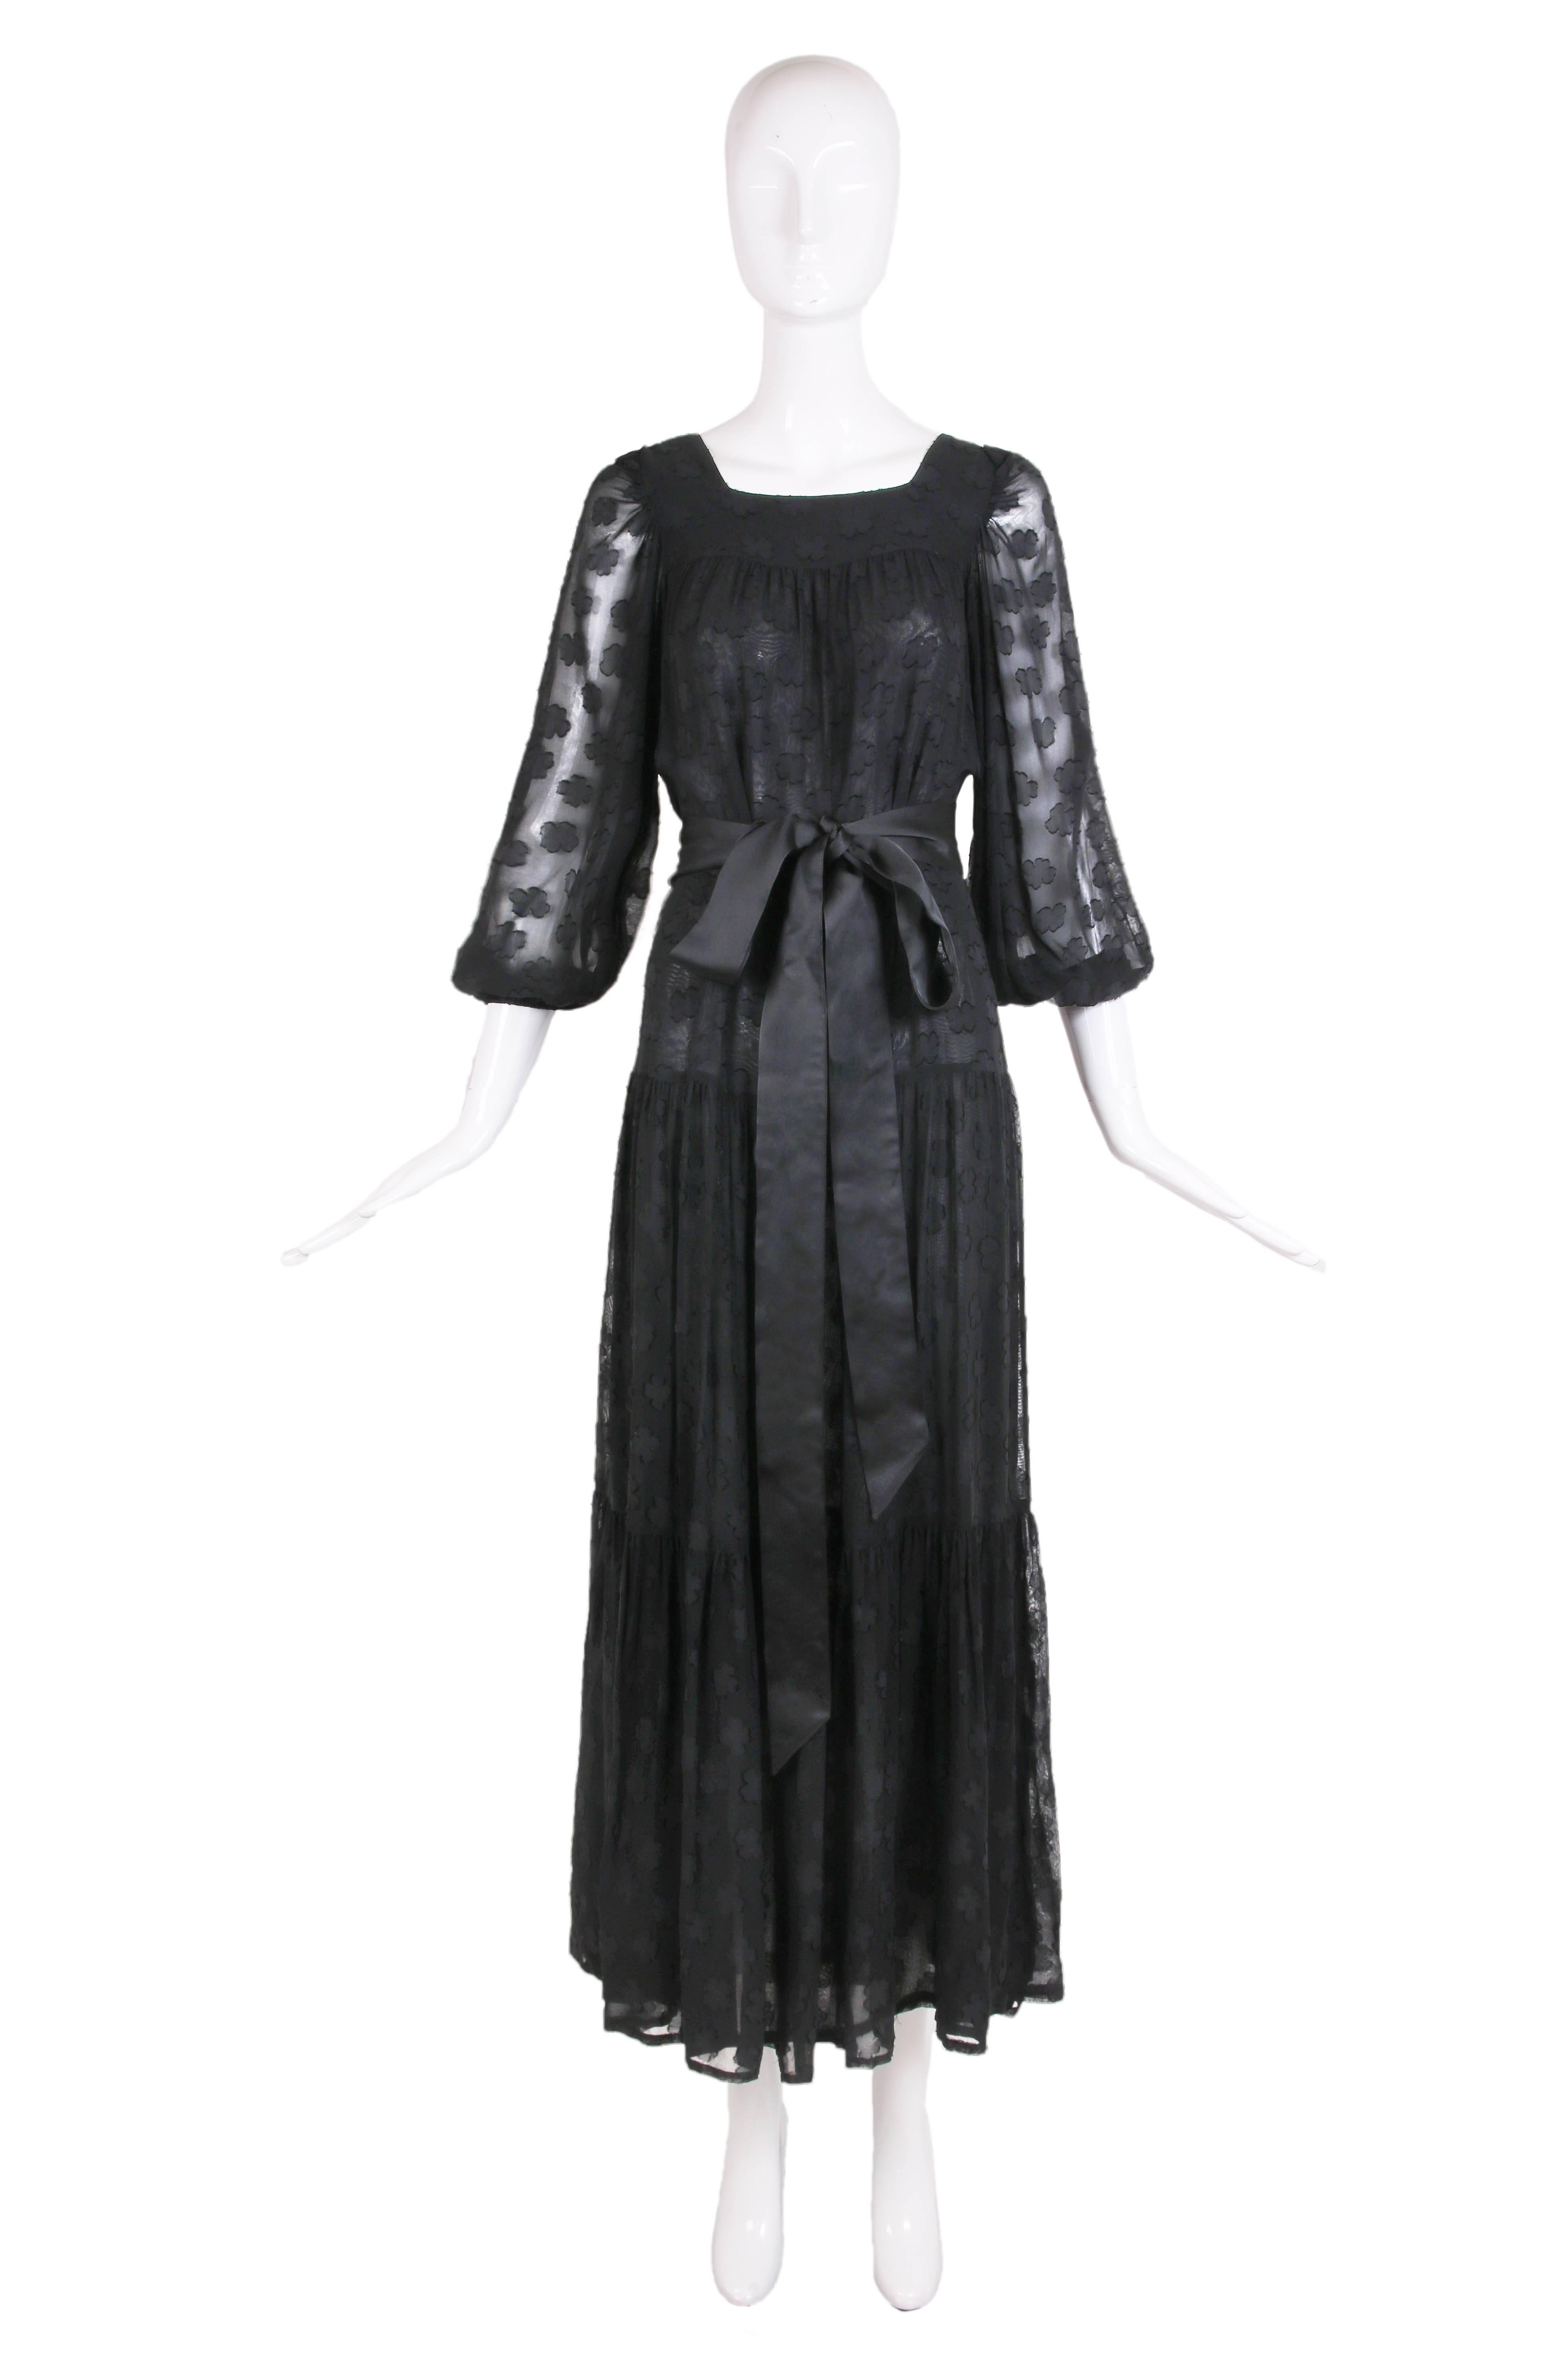 1980 Yves Saint Laurent black maxi dress with an abstract floral slightly raised pattern throughout, square neckline, tiered full skirt and sheer 3/4 sleeves. Dress is lined at the interior with black fabric so that only the sleeves appear to be